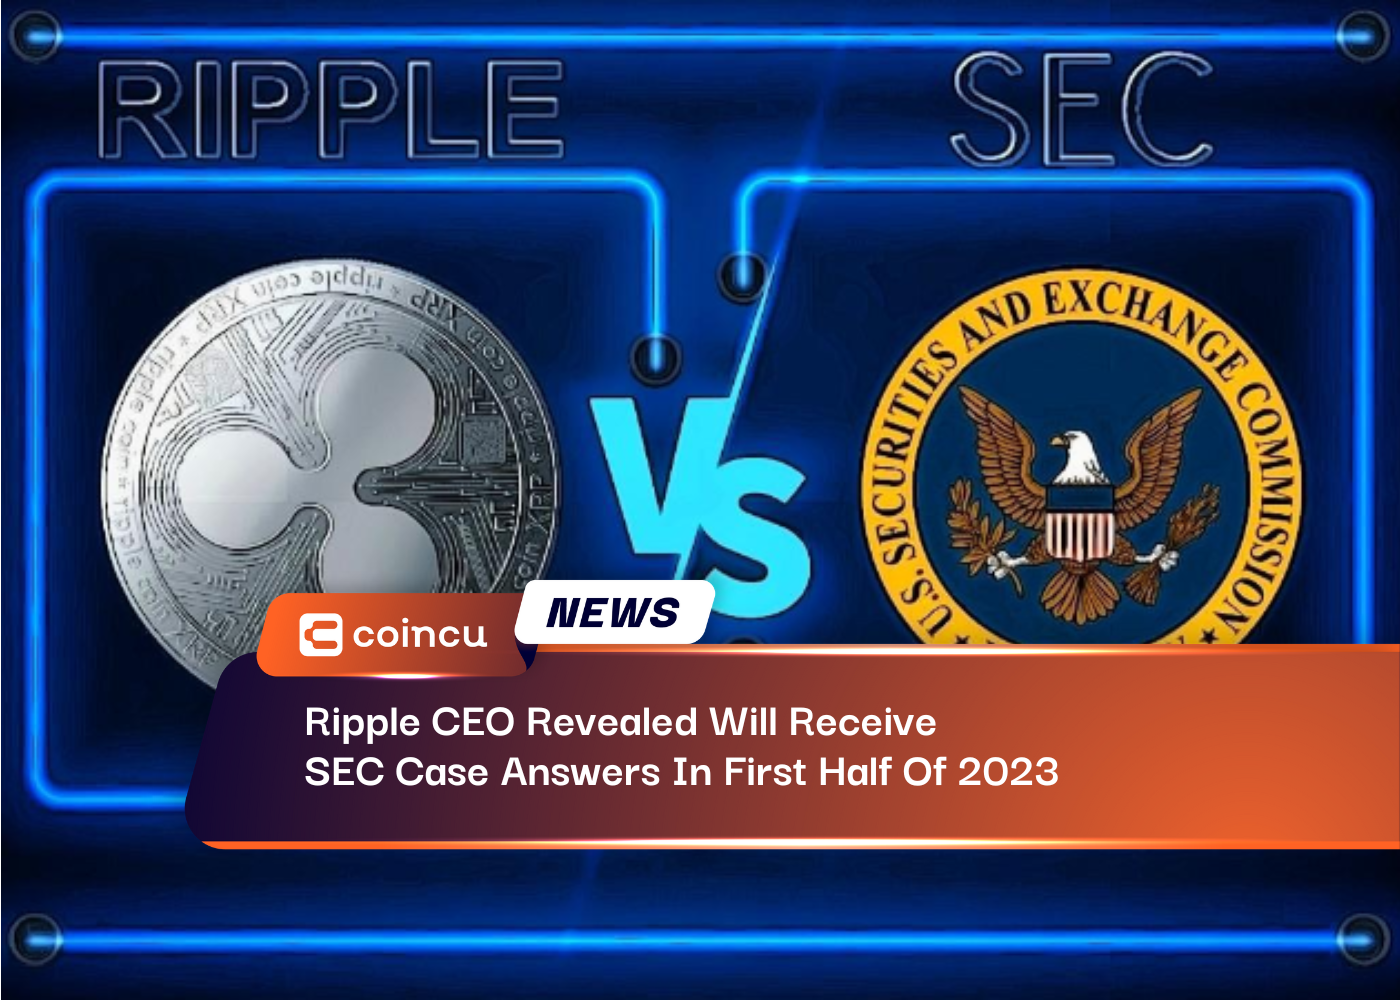 Ripple CEO Revealed Will Receive SEC Case Answers In First Half Of 2023